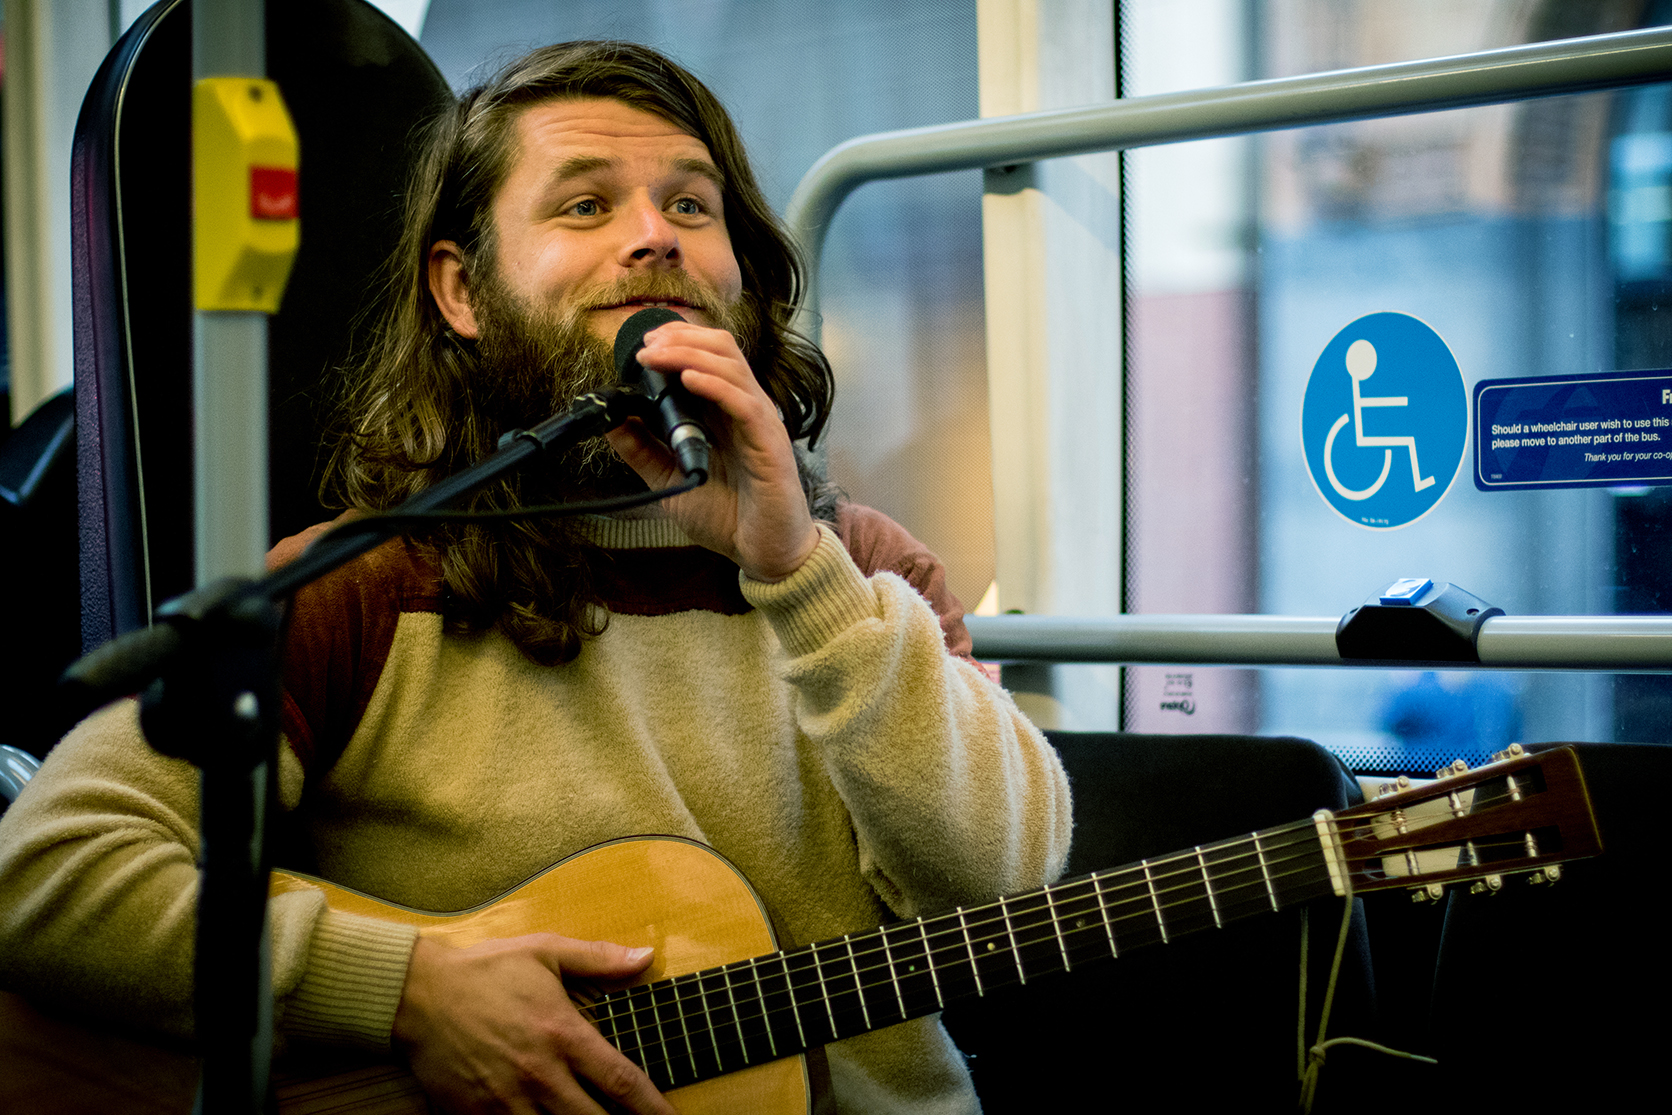 A guitarist plays music on a bus